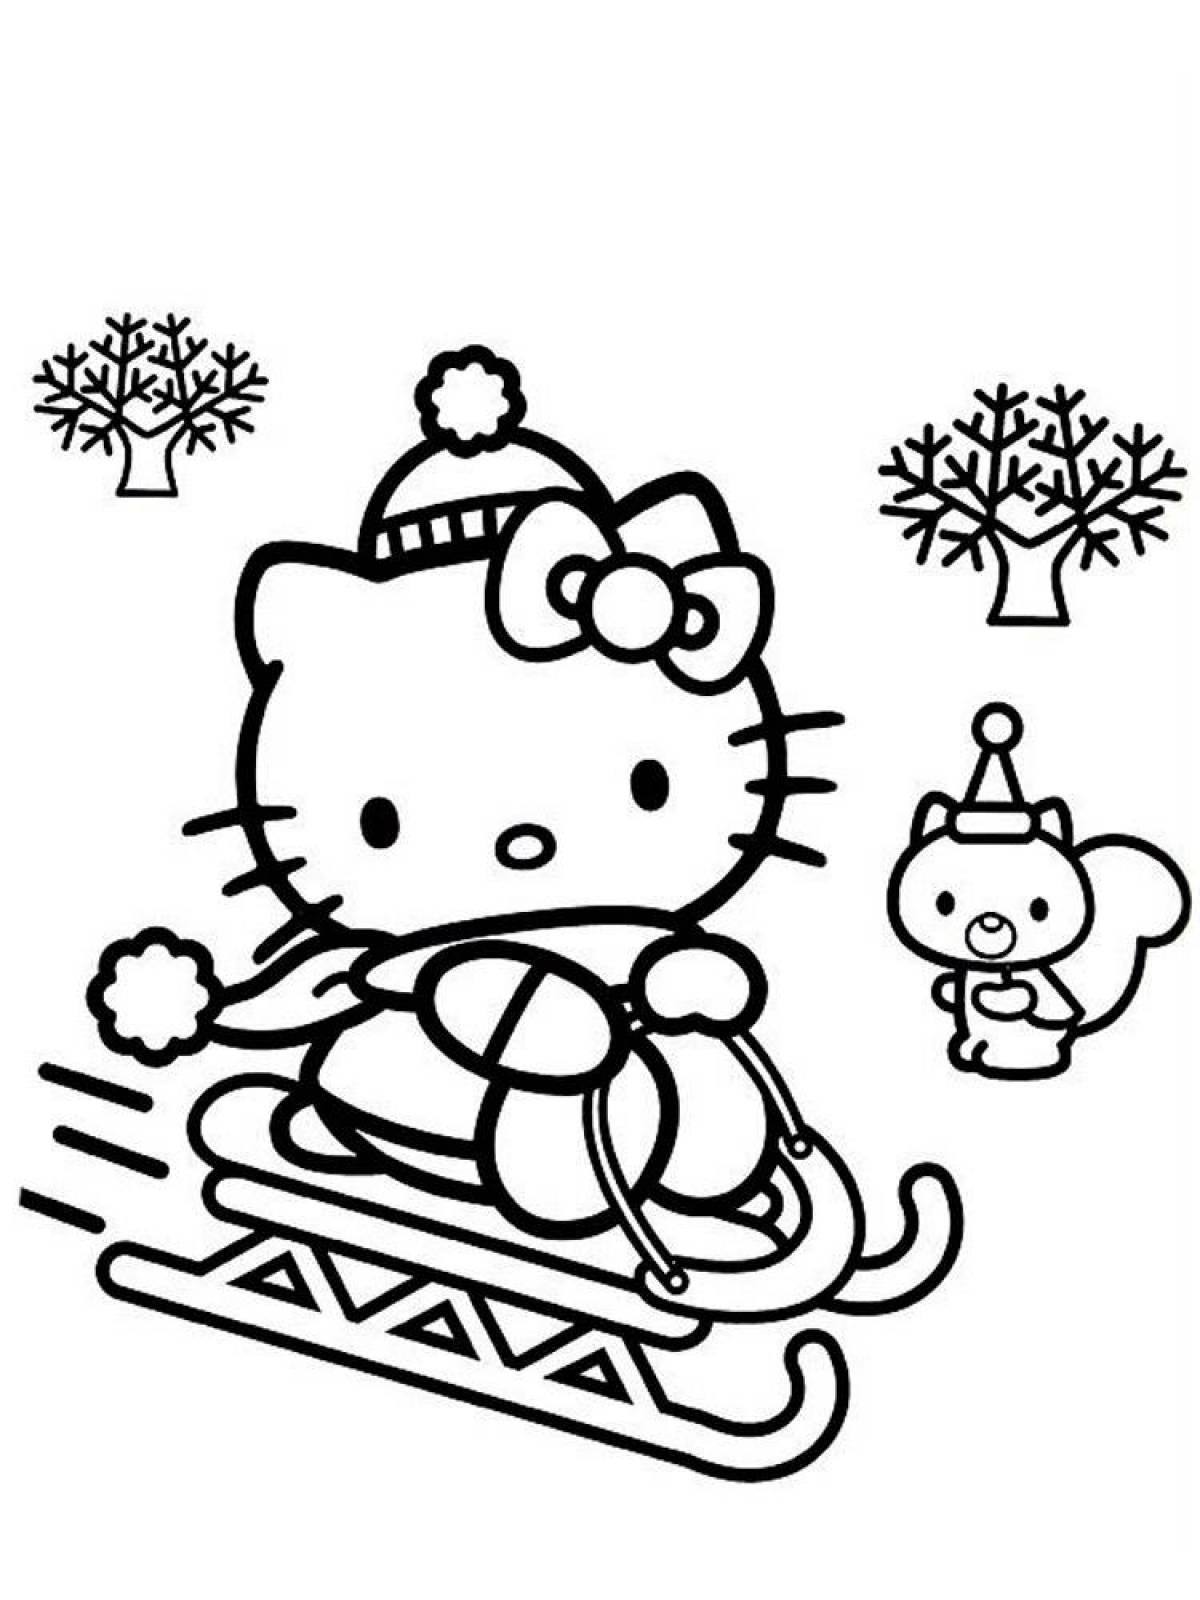 Cute hello kitty coloring book